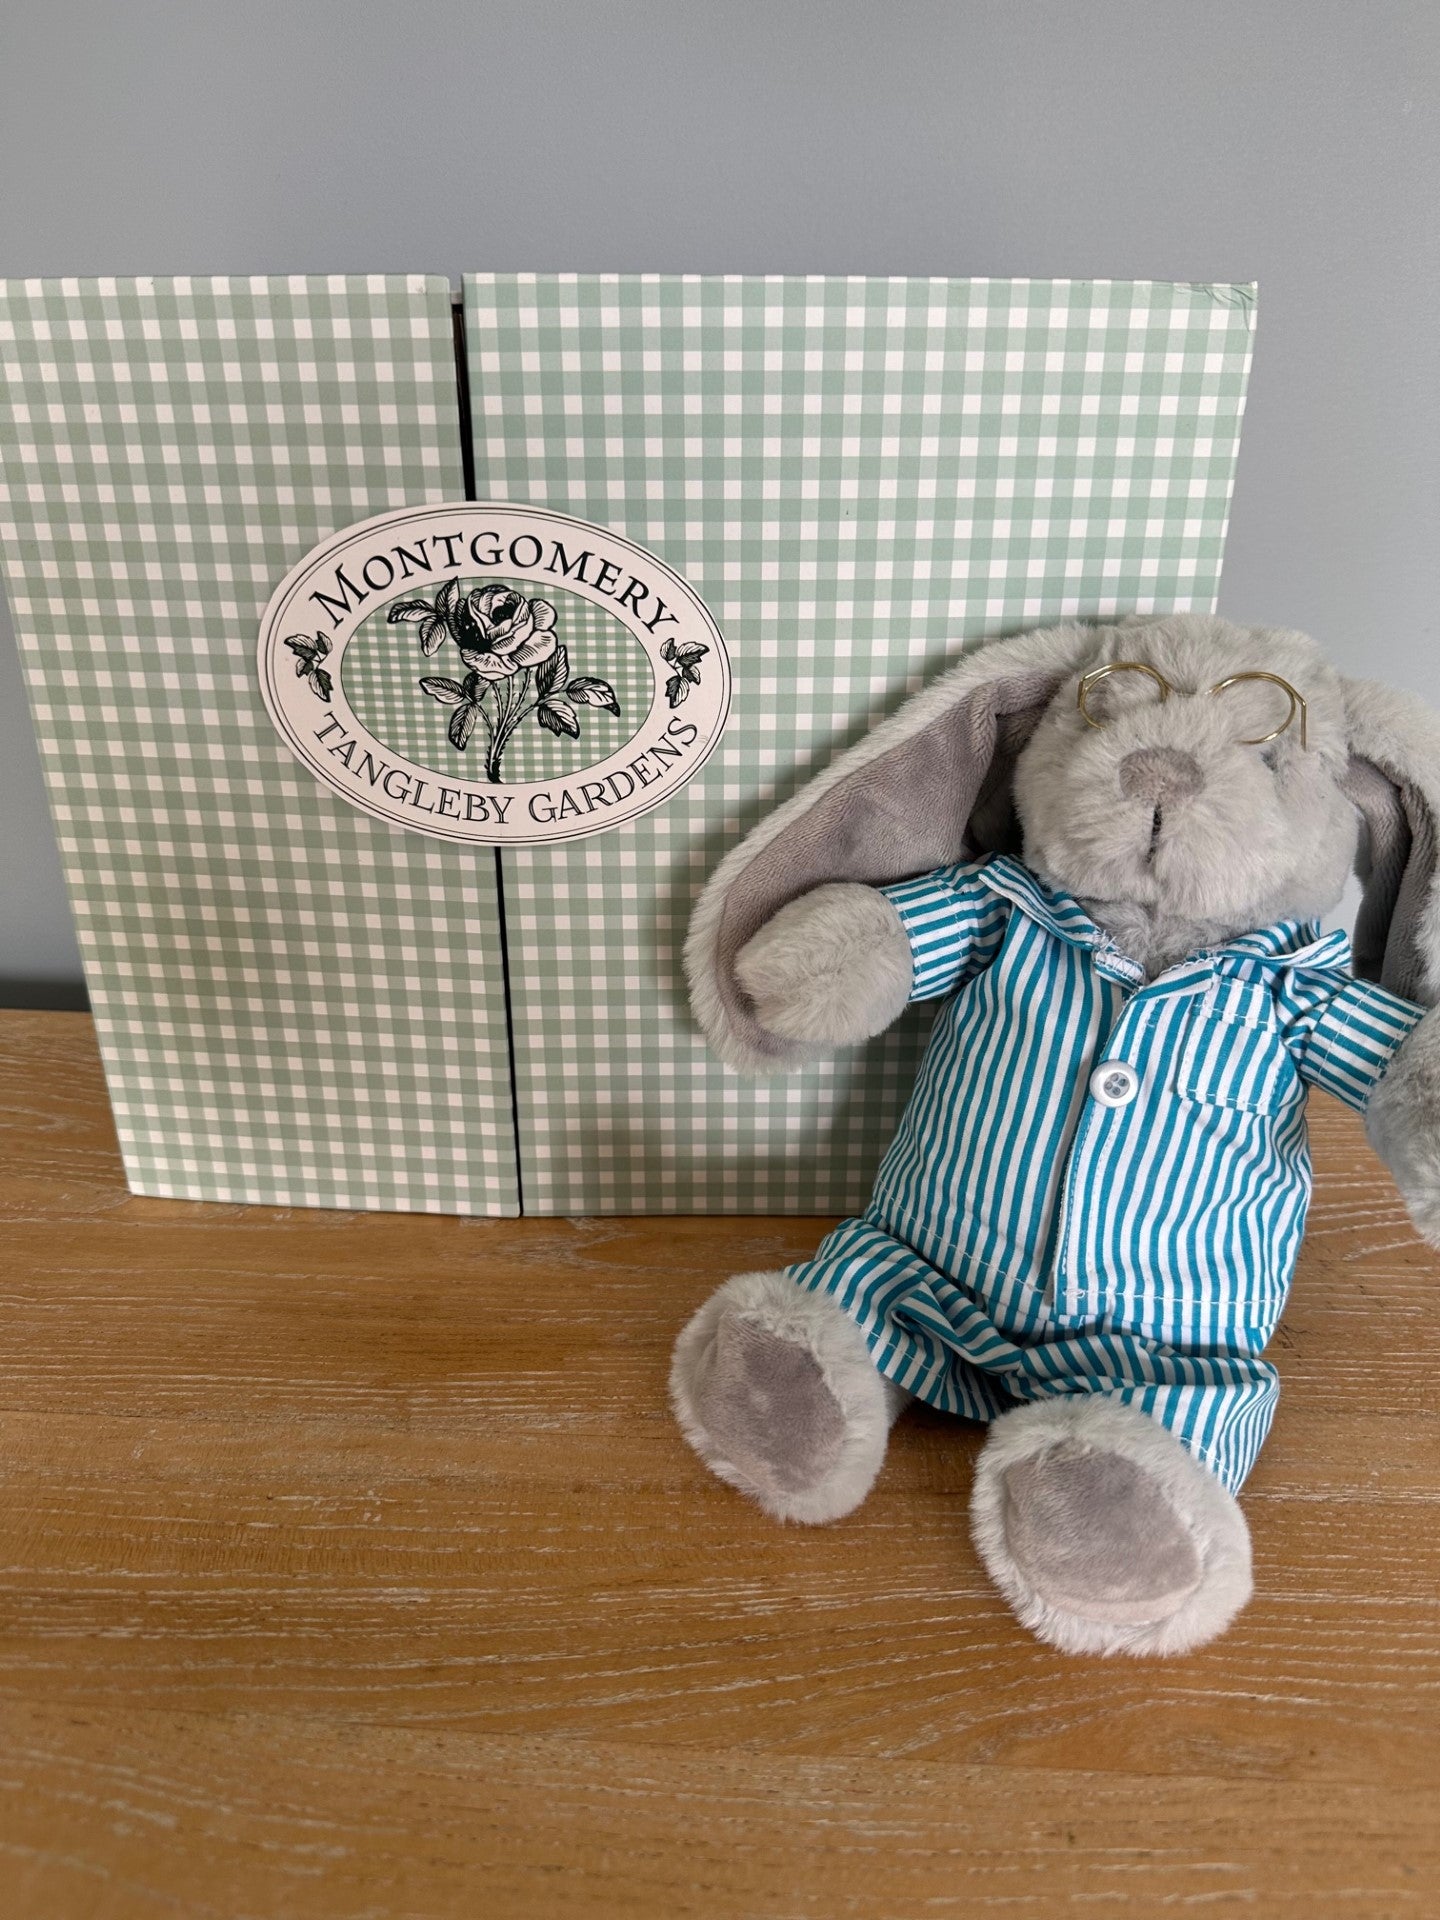 Montgomery soft toy Rabbit comes with his own wardrobe and in a heirloom box